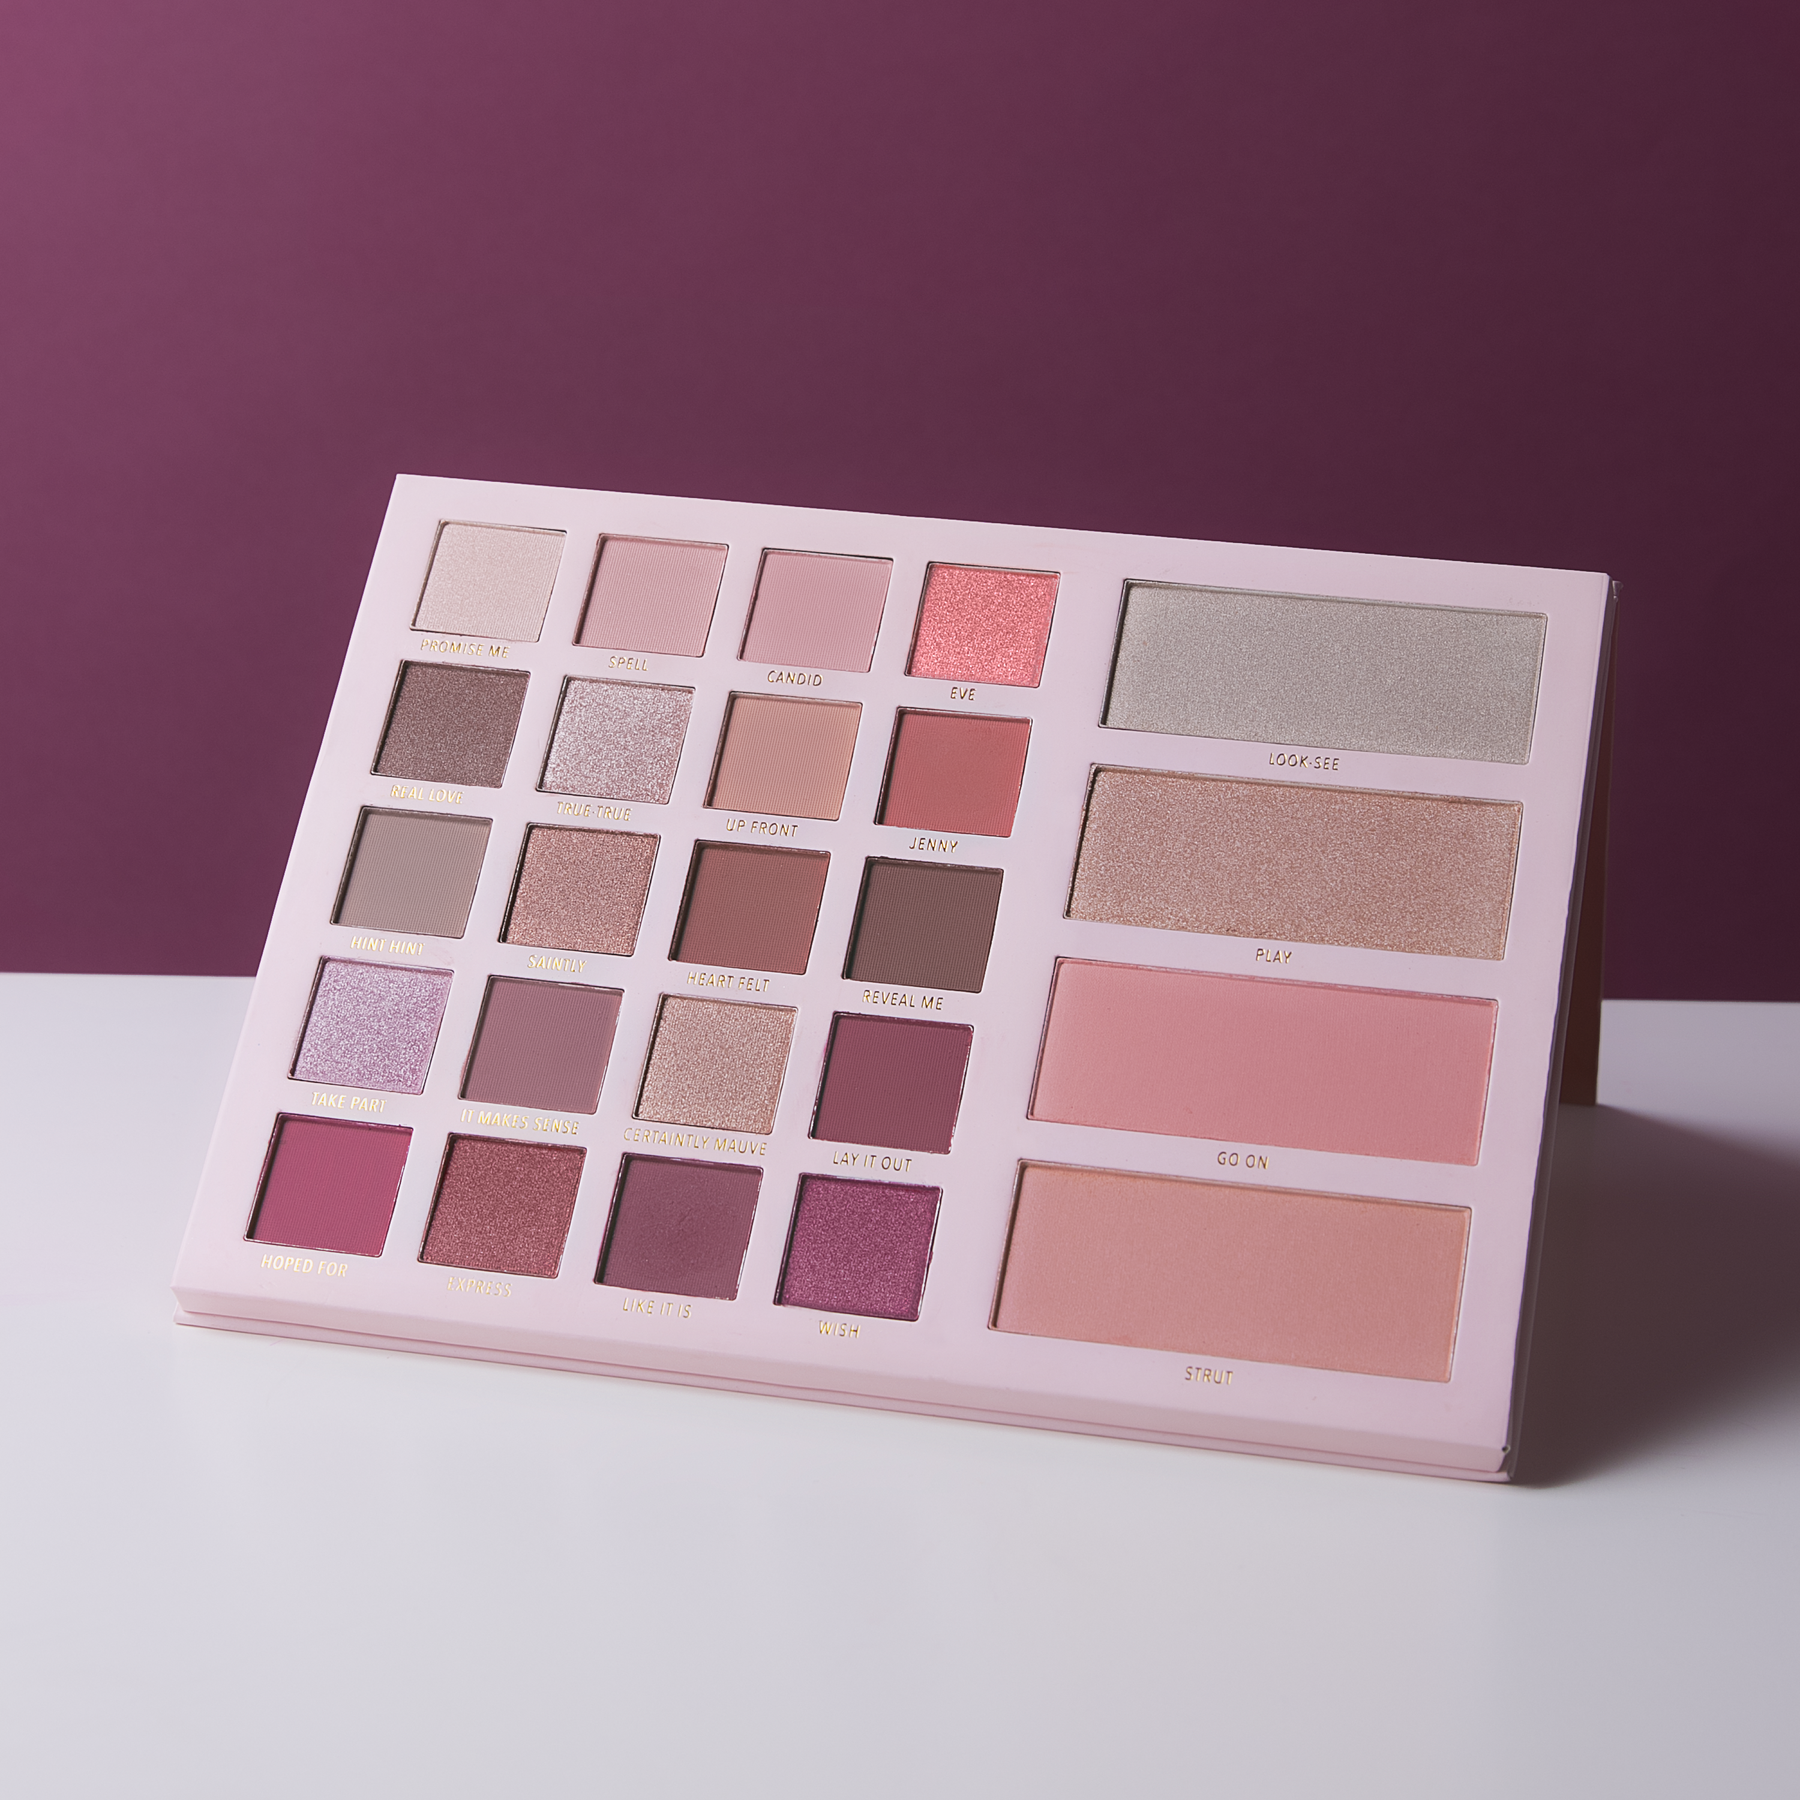 Moira Beauty - Meant to Be Palette